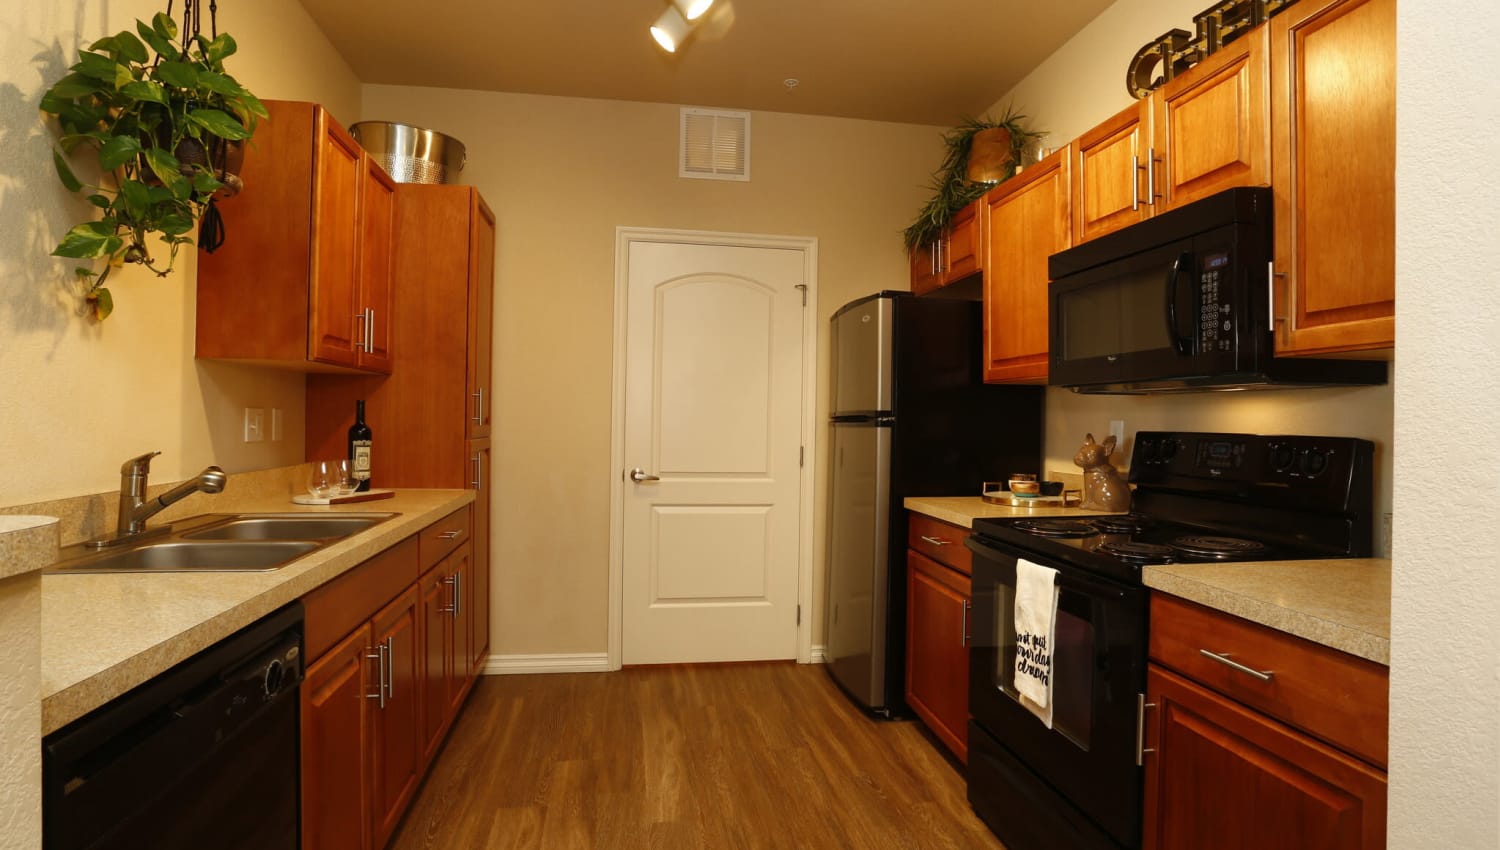 Model kitchen with wood-style flooring at The Preserve at Greenway Park in Casper, Wyoming